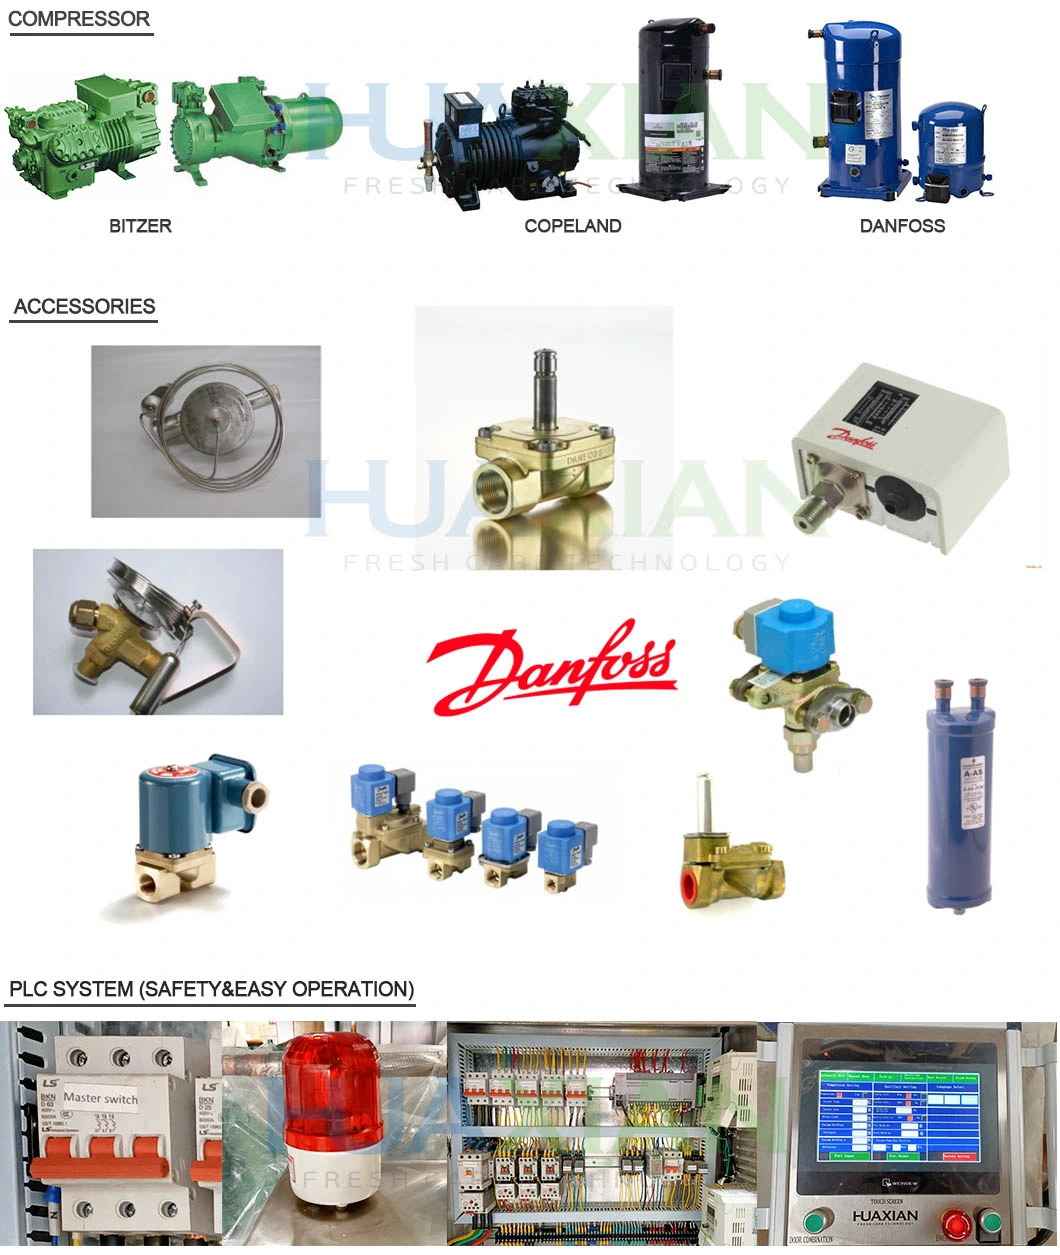 Hot Sale China Farming Fruit Process Danfoss Machine Air Condenser Cooling System Water Cooled Chiller